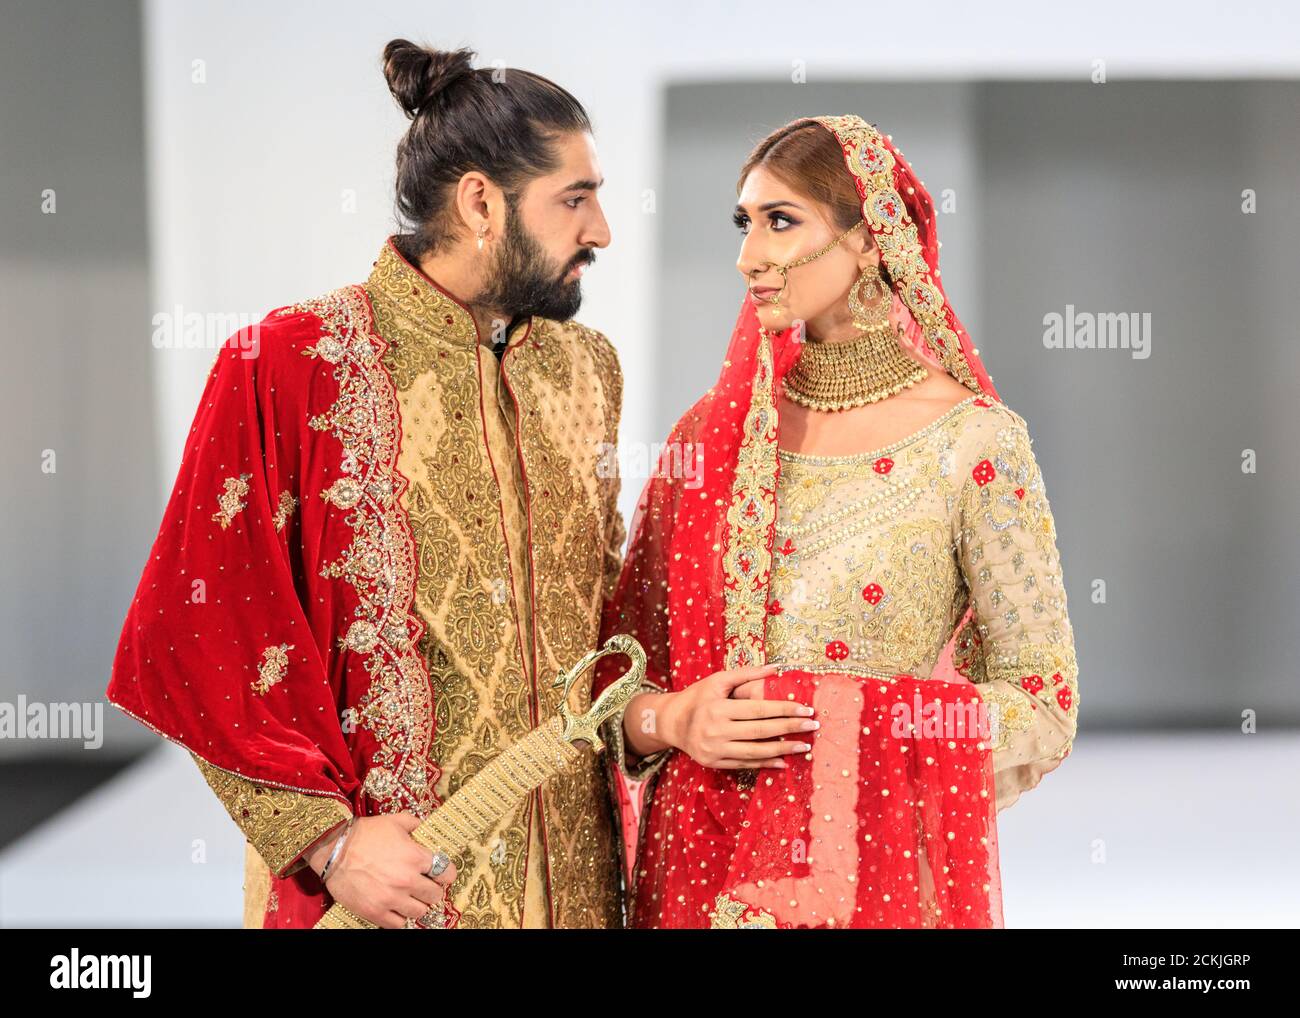 Model bride and groom, Asian wedding dress bridal wear, gown by Sache by Asif, National Asian Wedding Show fashion runway, London Stock Photo